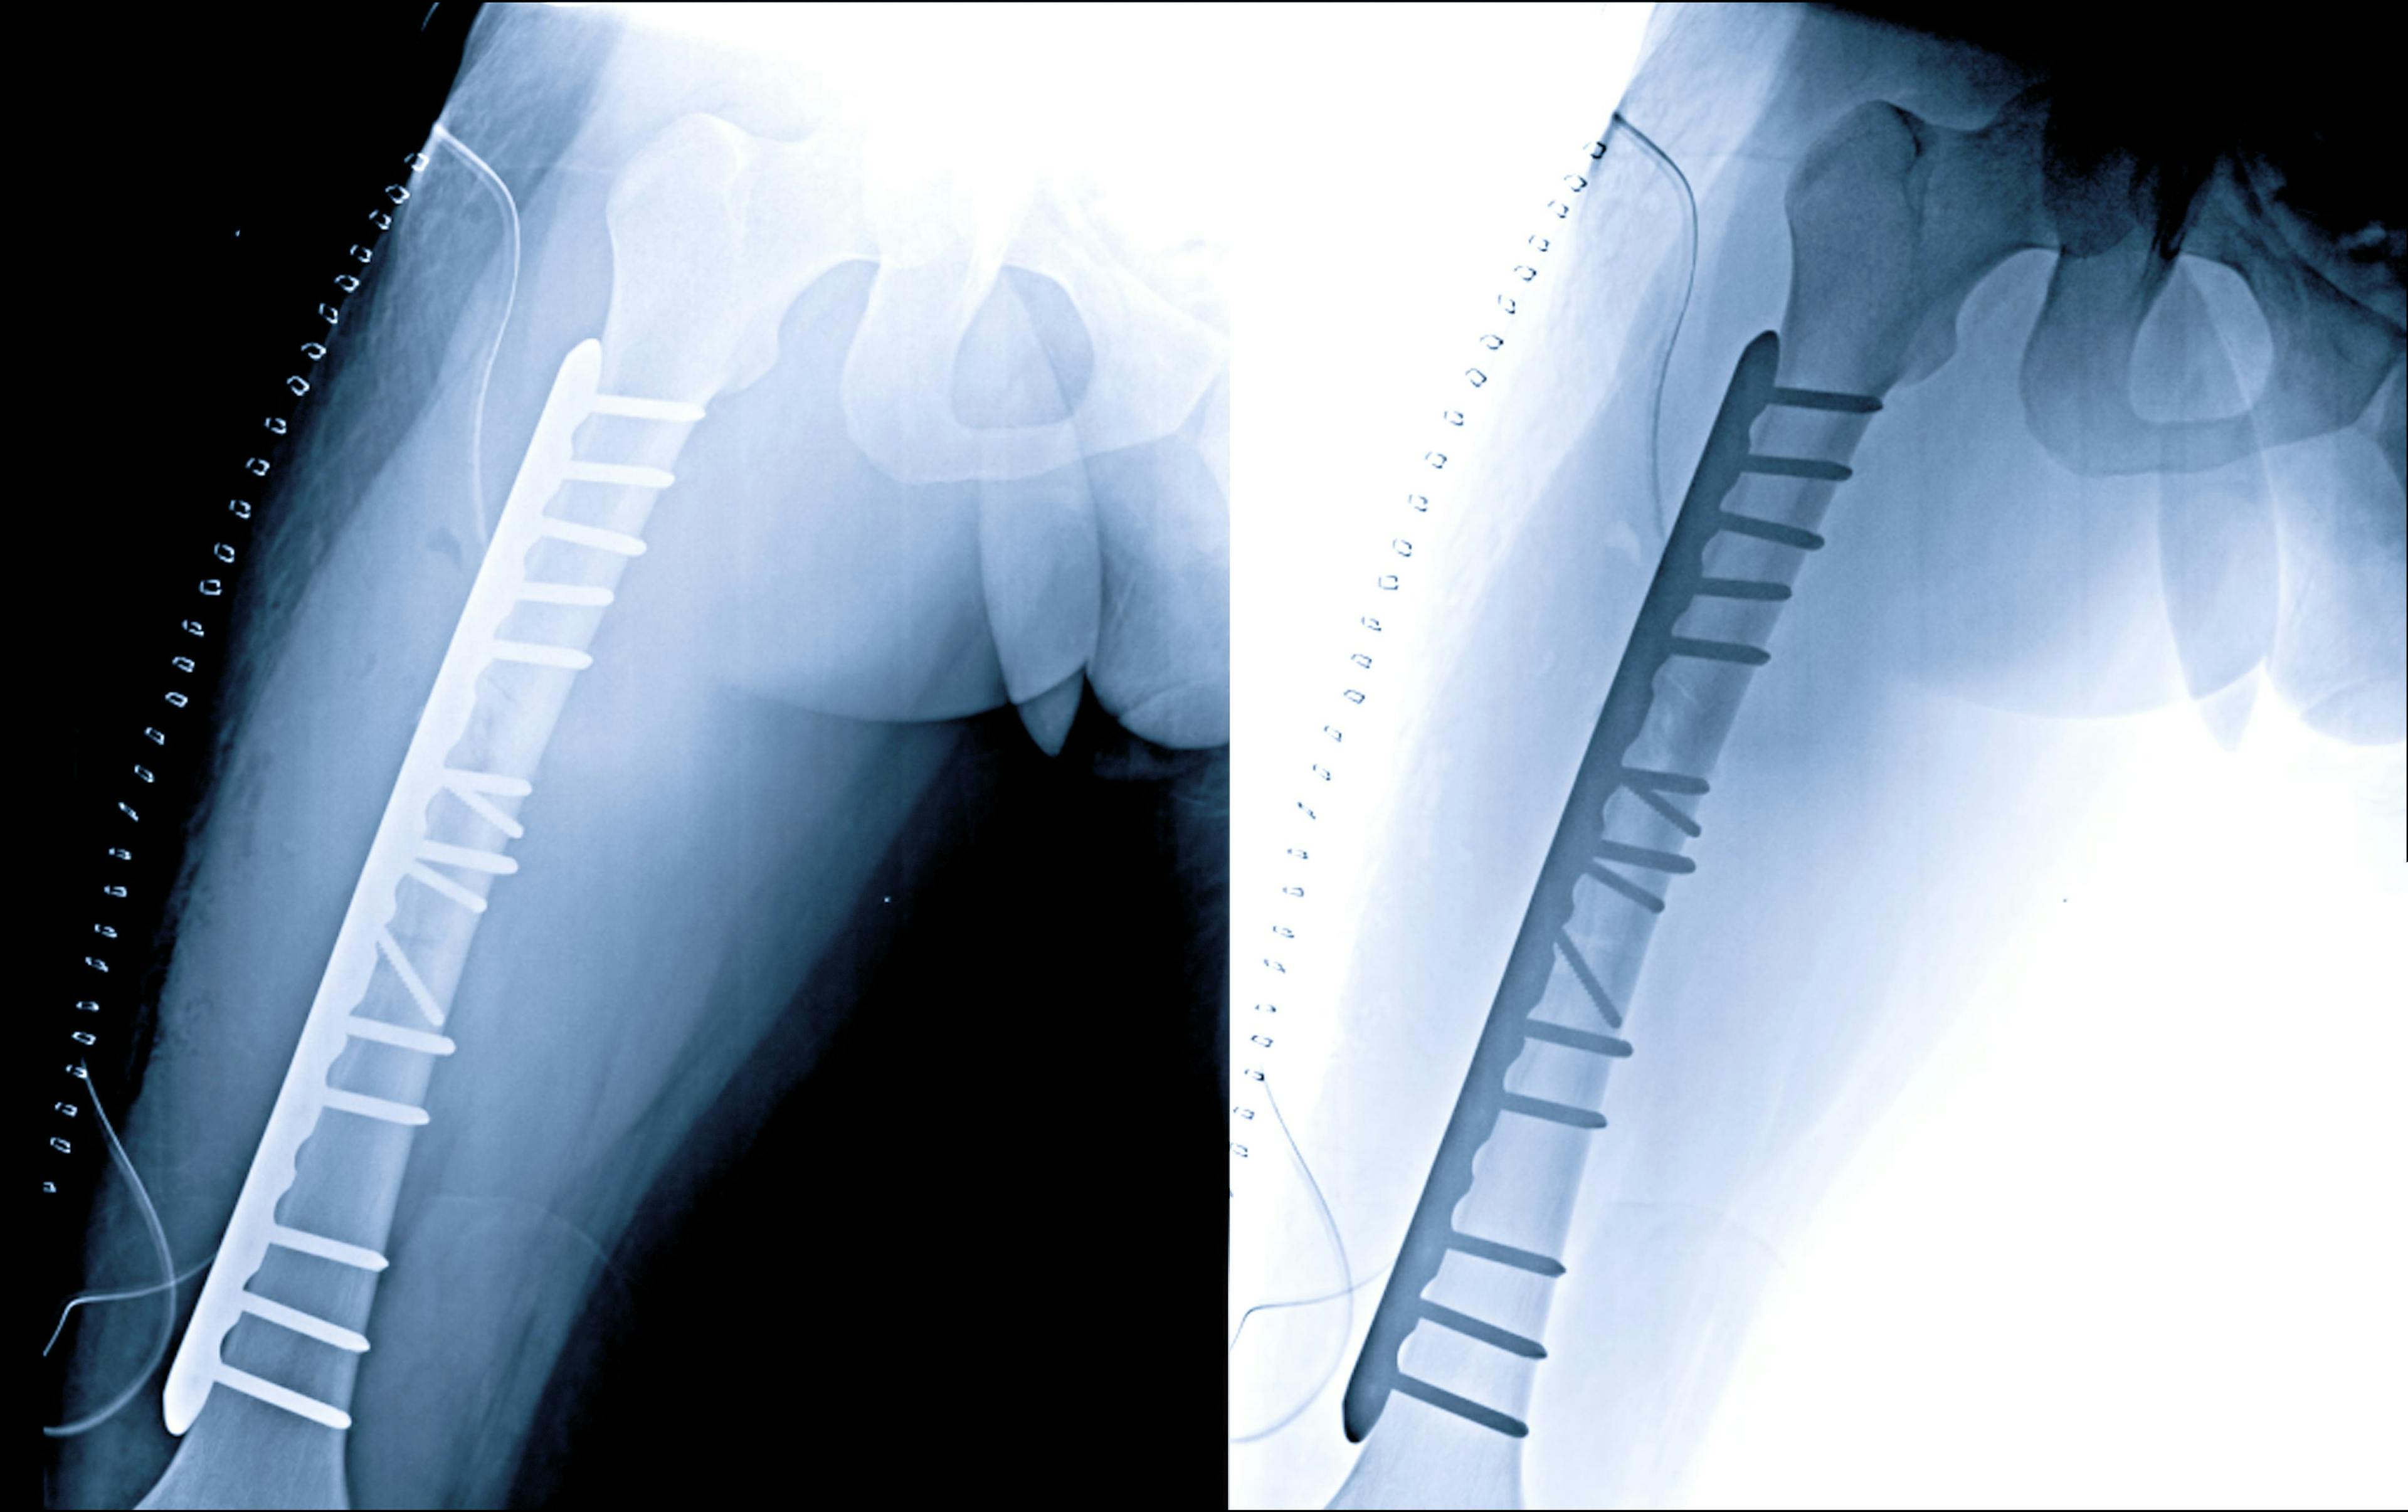 Atypical Bone Fracture Risk Rises With Bisphosphonates